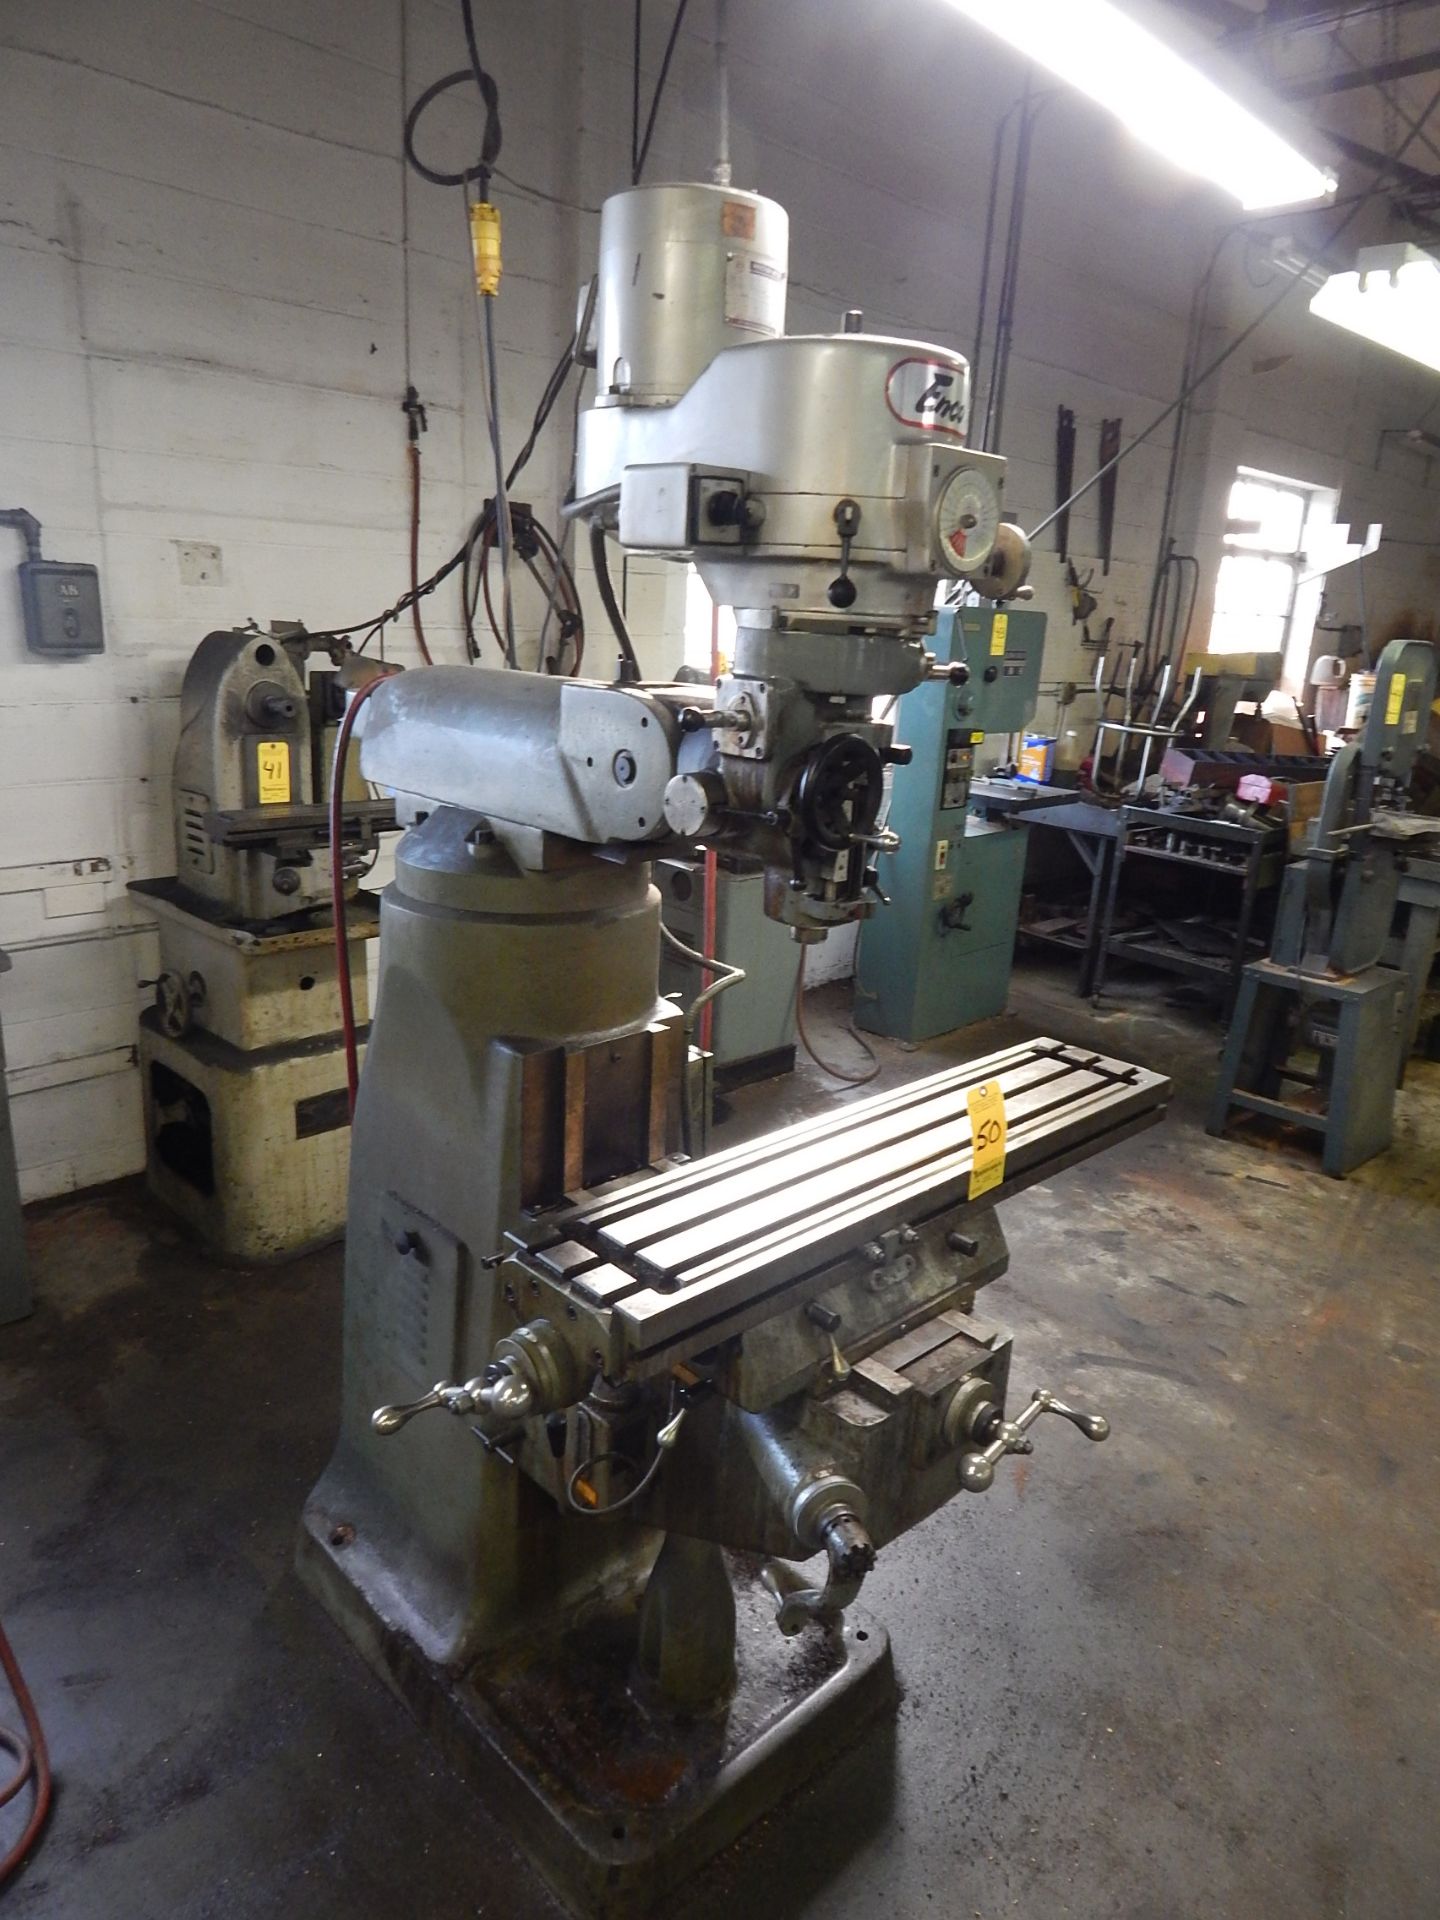 Enco 2 HP Variable Speed Vertical Mill, Model 92066, s/n 748514, 9" X 42" Table, Loading Fee $100.00 - Image 4 of 4